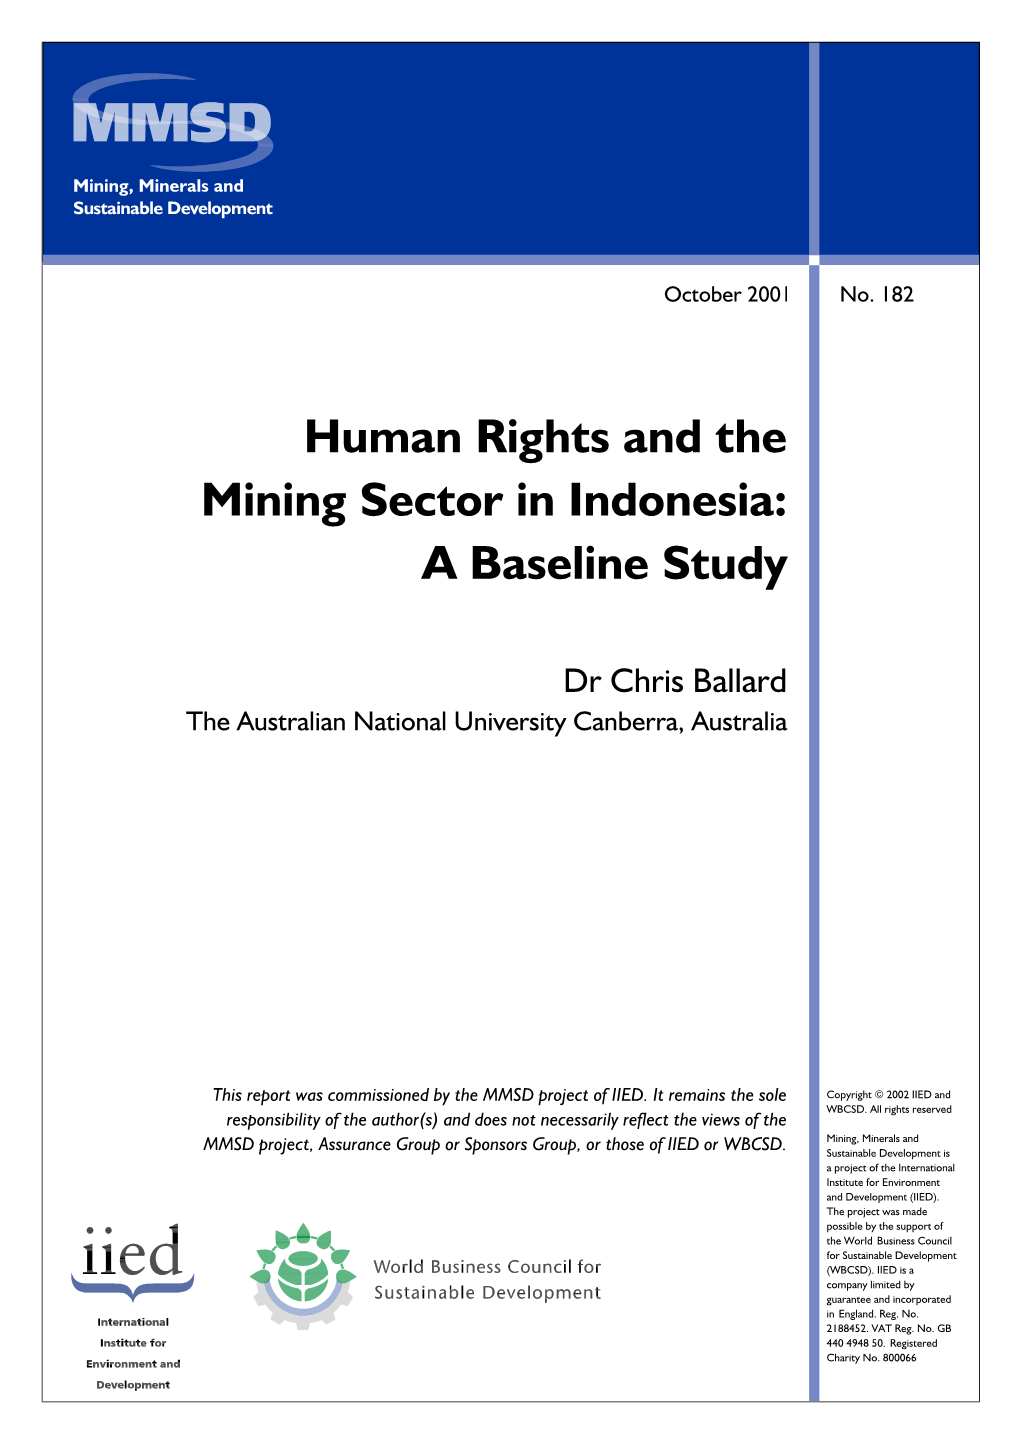 Human Rights and the Mining Sector in Indonesia: a Baseline Study